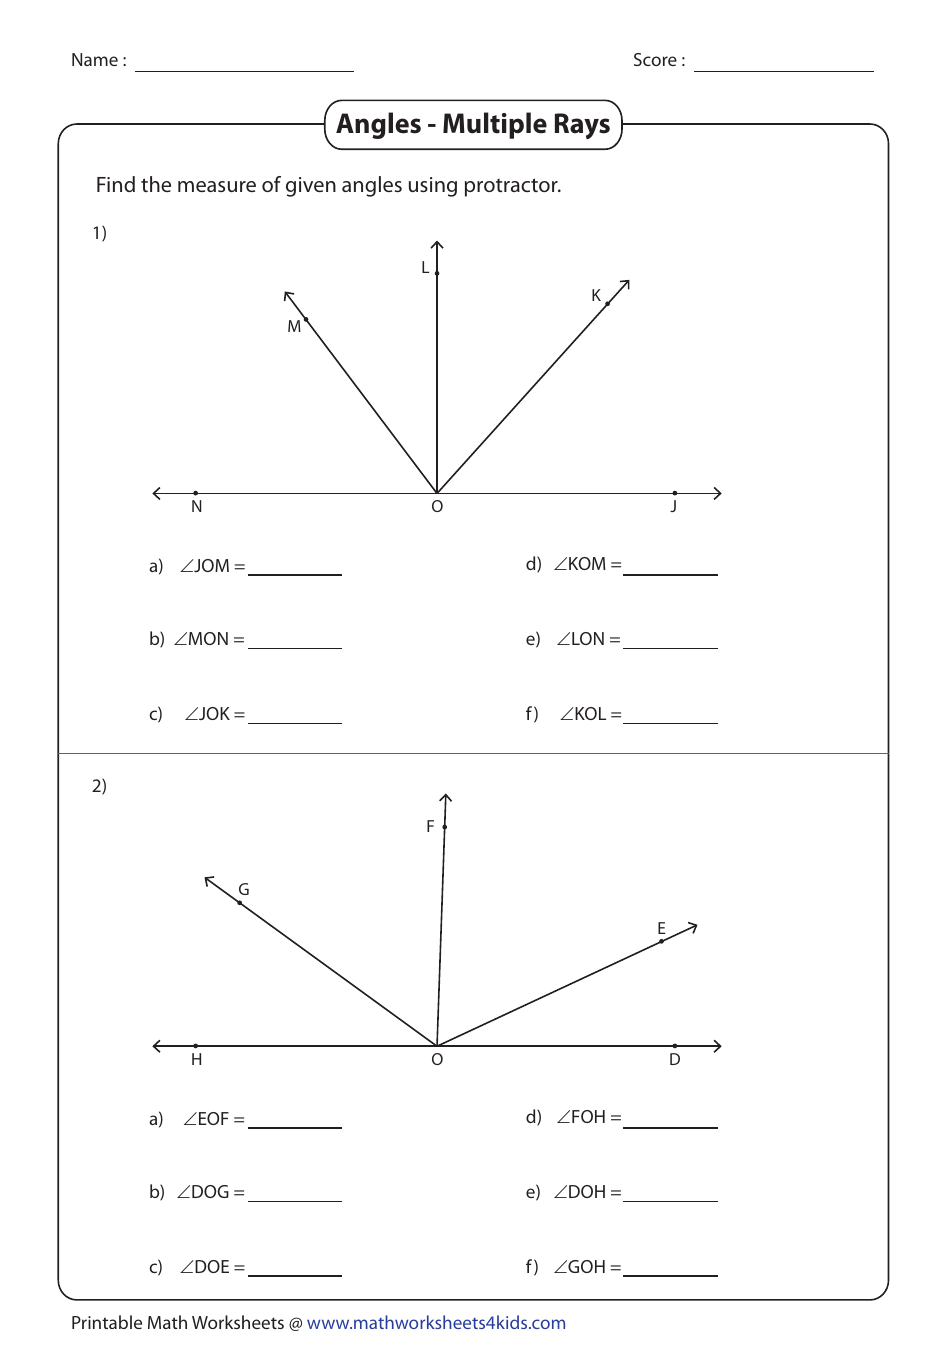 Multiple Rays Worksheet With Answers - Free Printable PDF